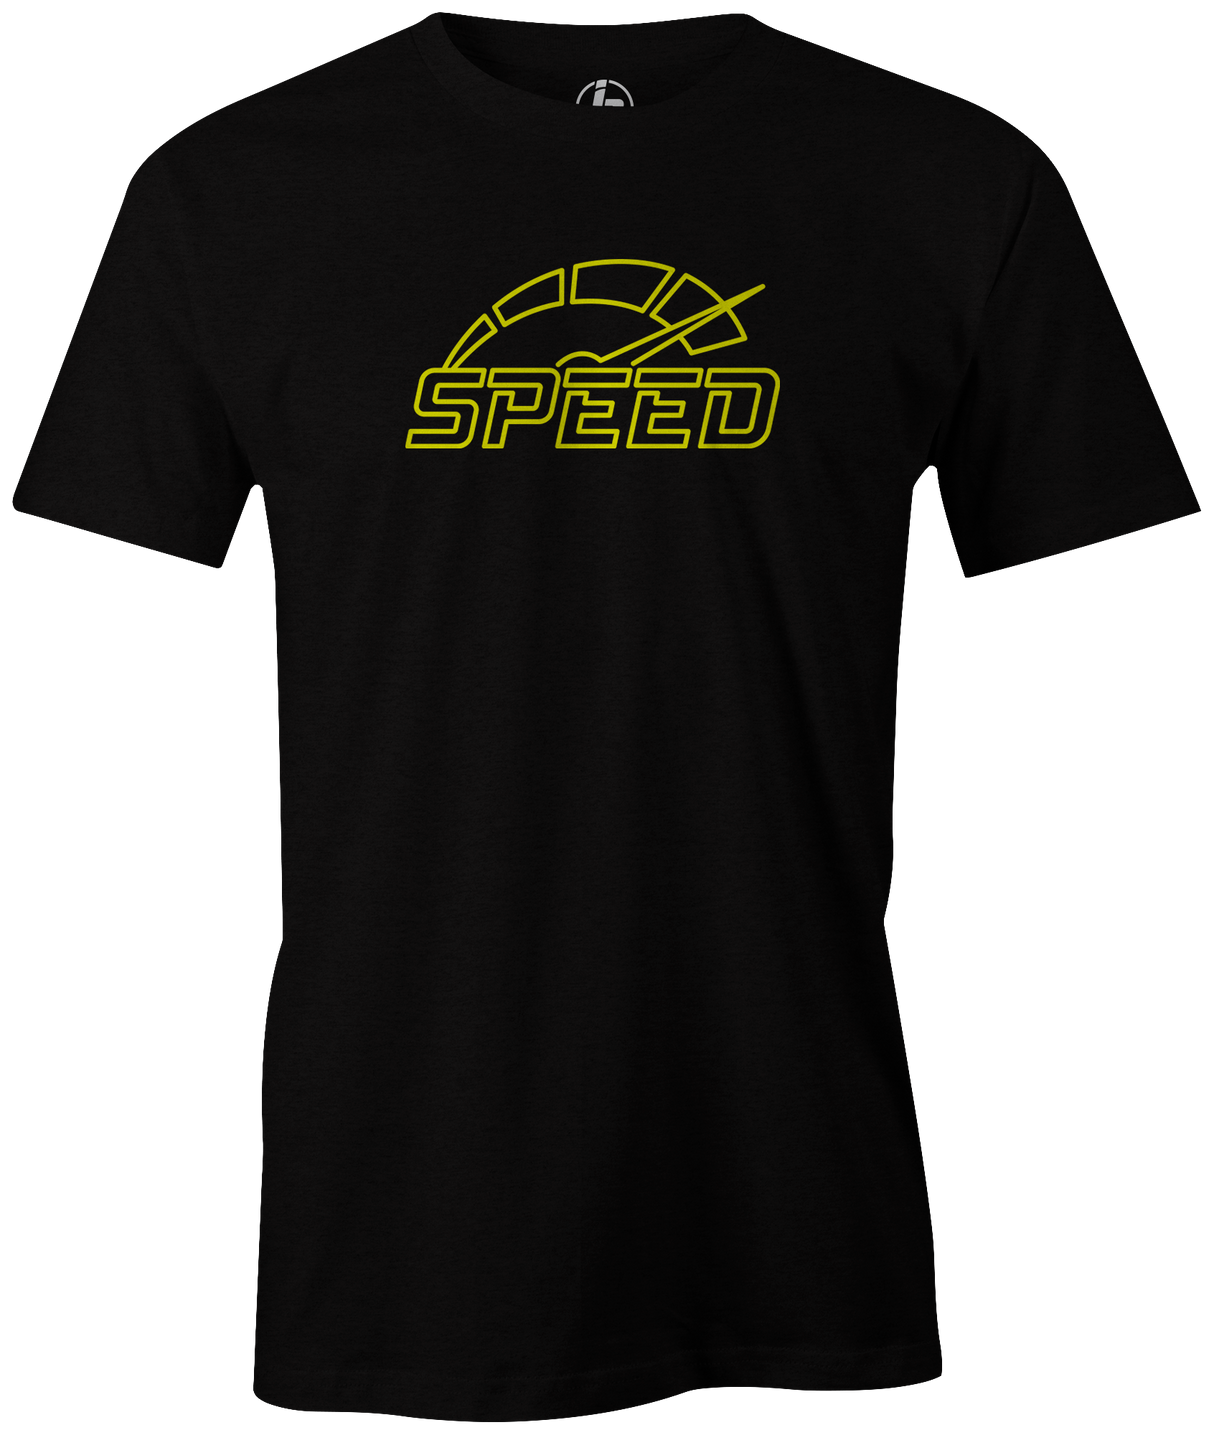 You will definitely feel the need for Speed! Columbia 300 brings you the new Speed. Pick up the Speed tee available in Red and Black. Hit the lanes in this awesome shirt and knock down some pins! This is the perfect gift for any long time bowler or fan of Columbia 300! Tshirt, tee, tee-shirt, tee shirt, Pro shop. League bowling team shirt. PBA. PWBA. USBC. Junior Gold. Youth bowling. Tournament t-shirt. Men's. 